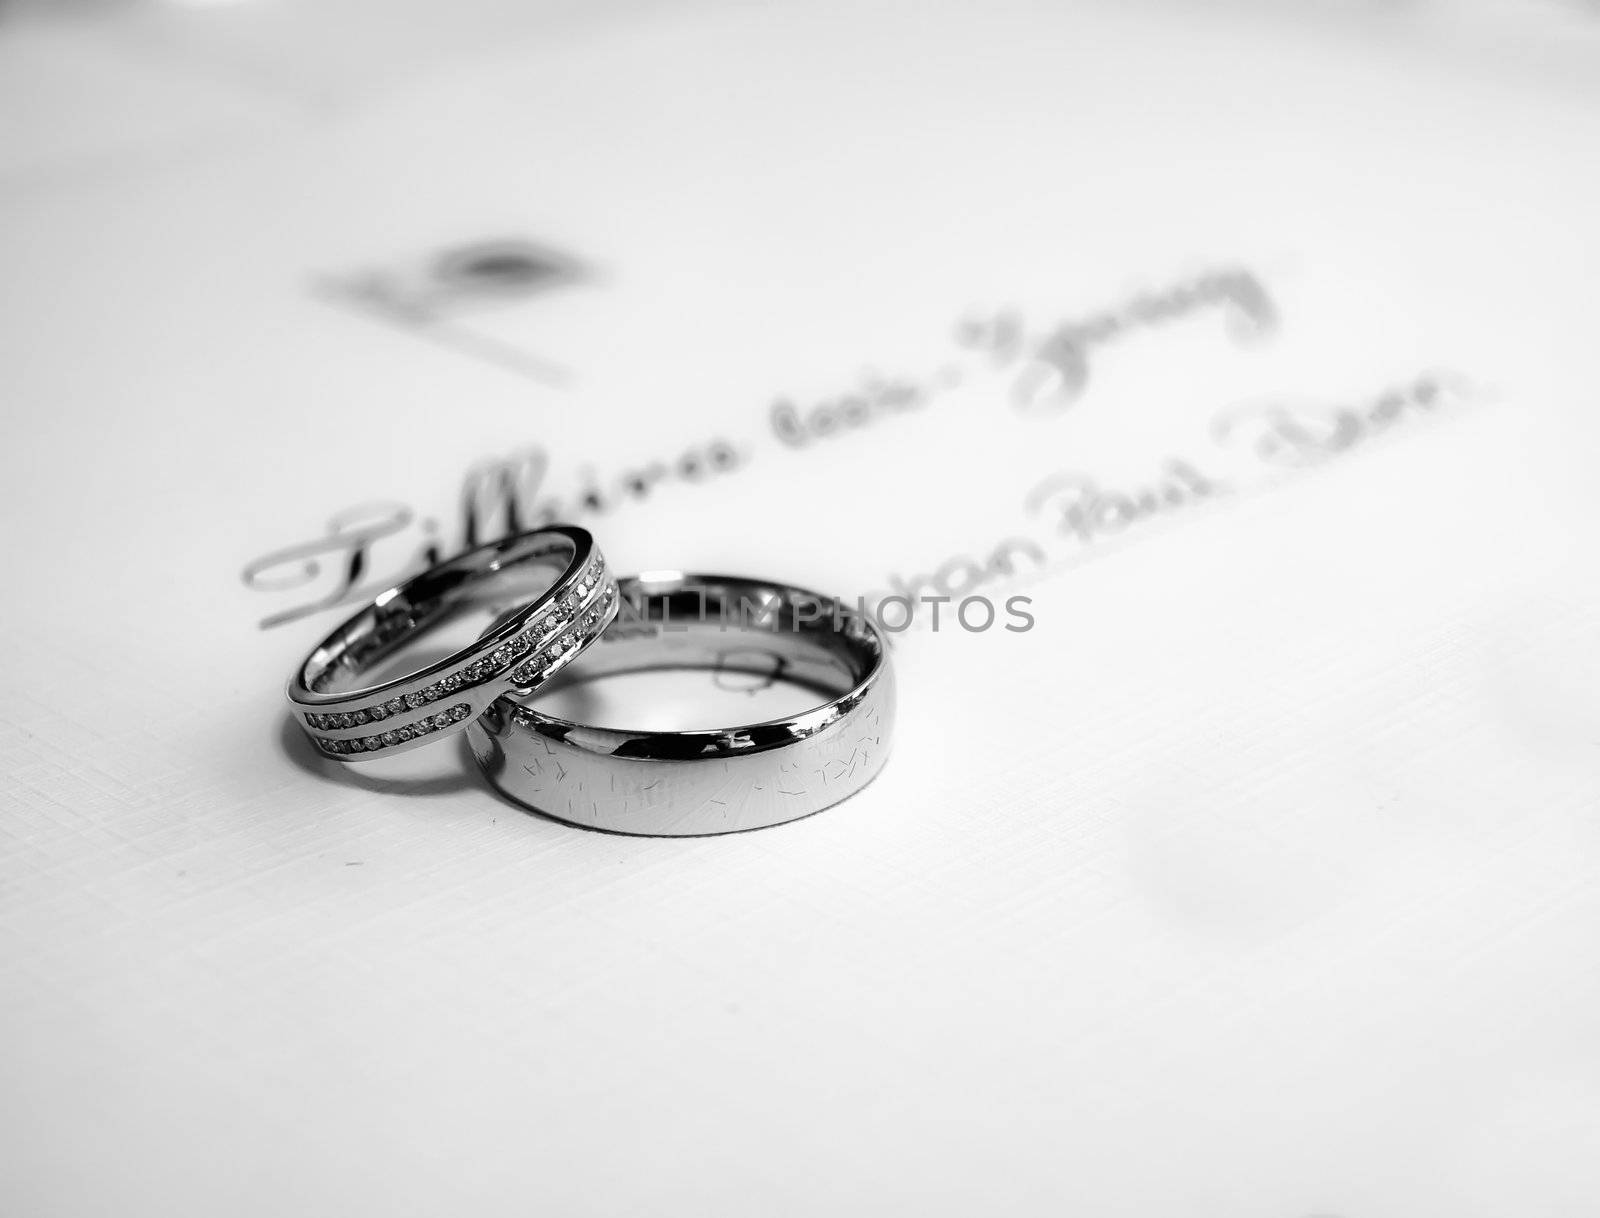 Wedding Band by PhotoWorks